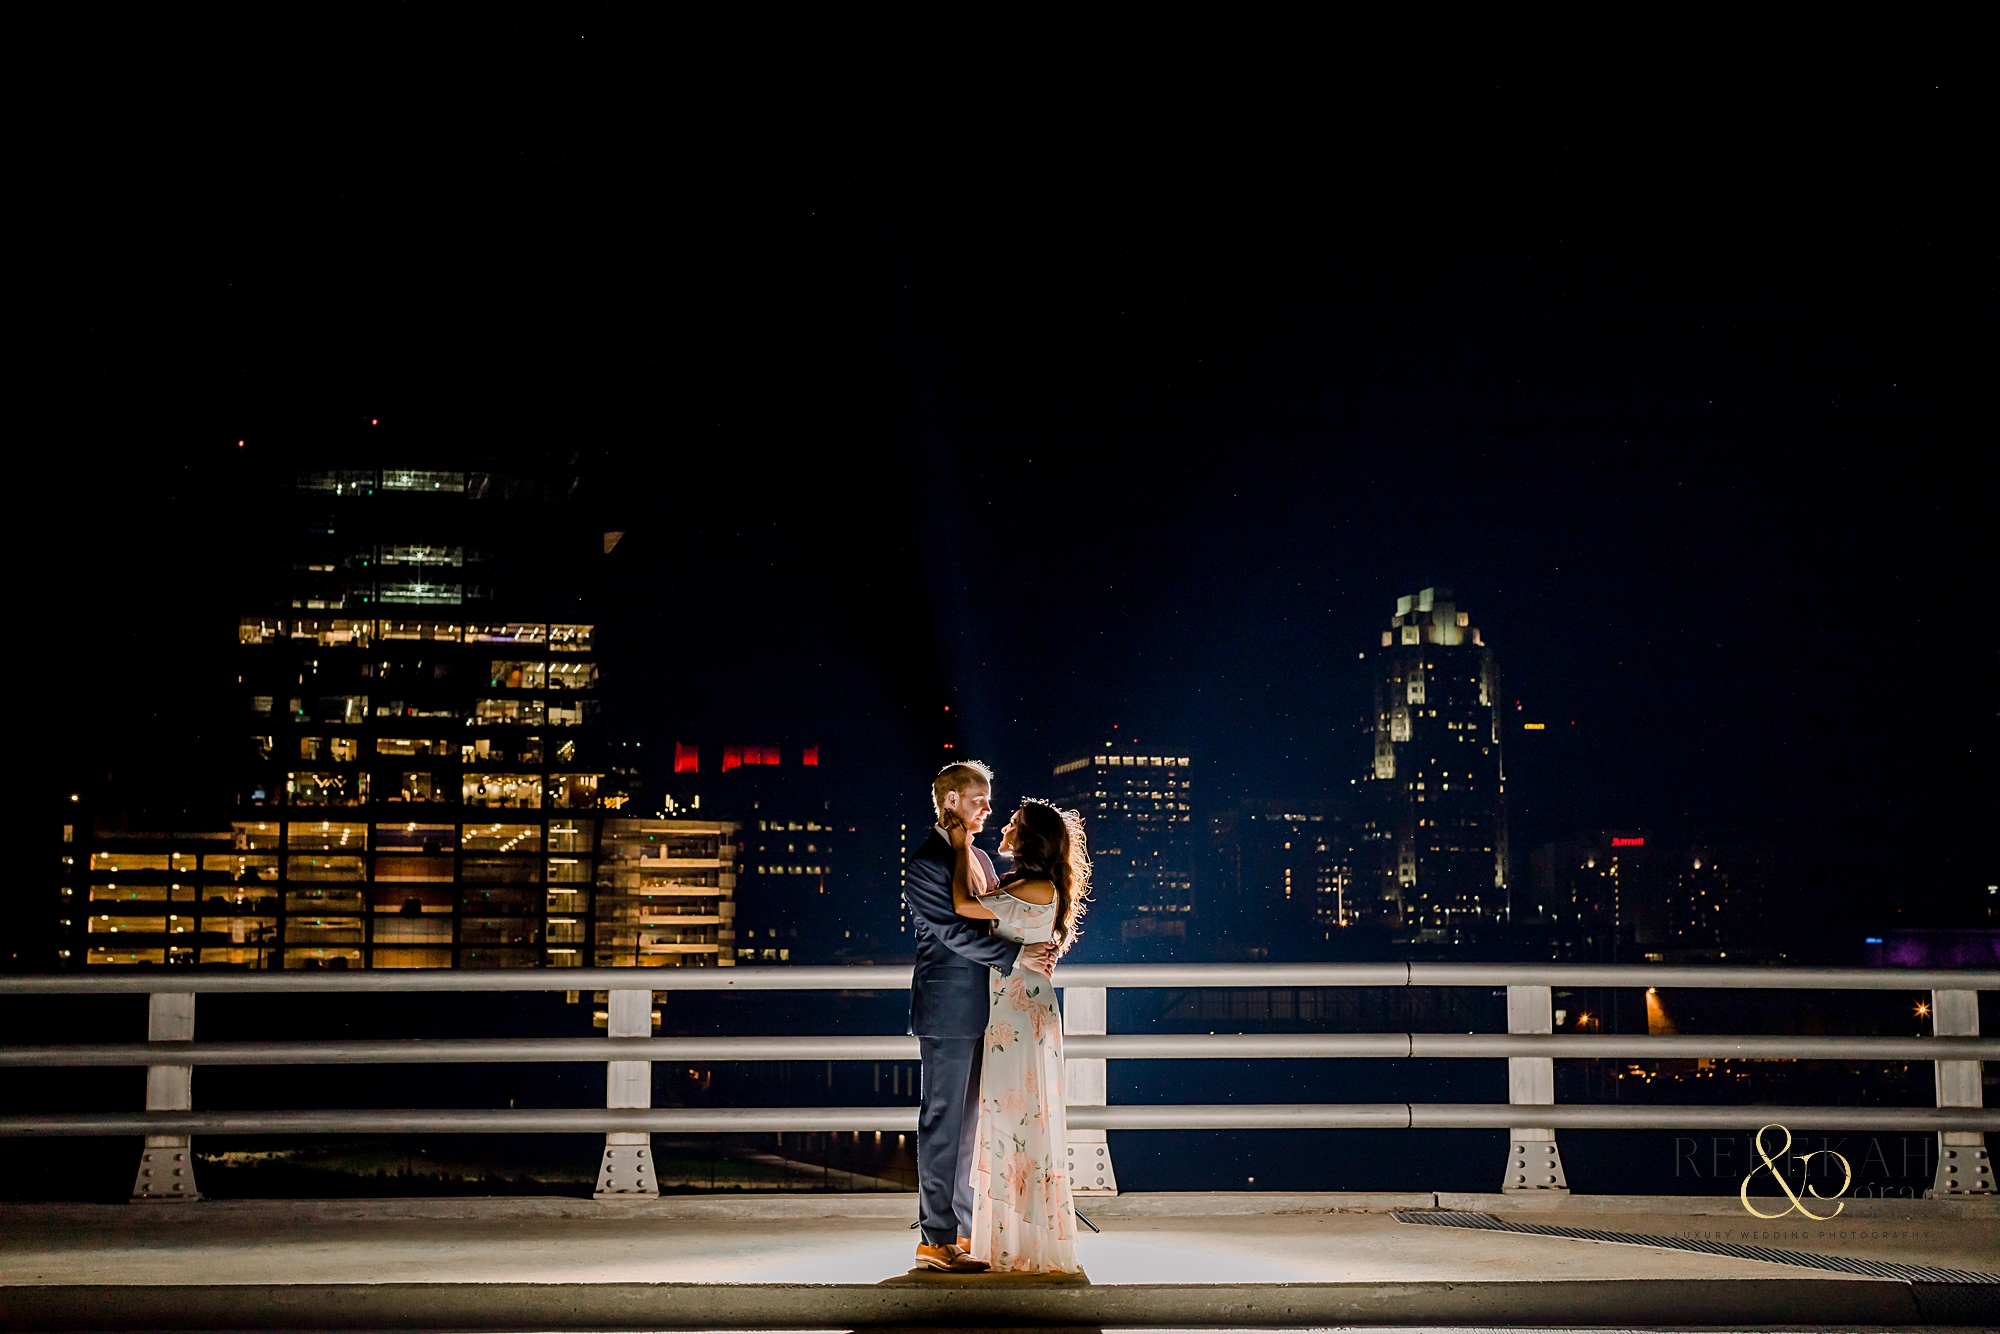 Engagement Photography | Night city lights in Downtown Raleigh, North Carolina. | Photography by Rebekah & Grace Photography.